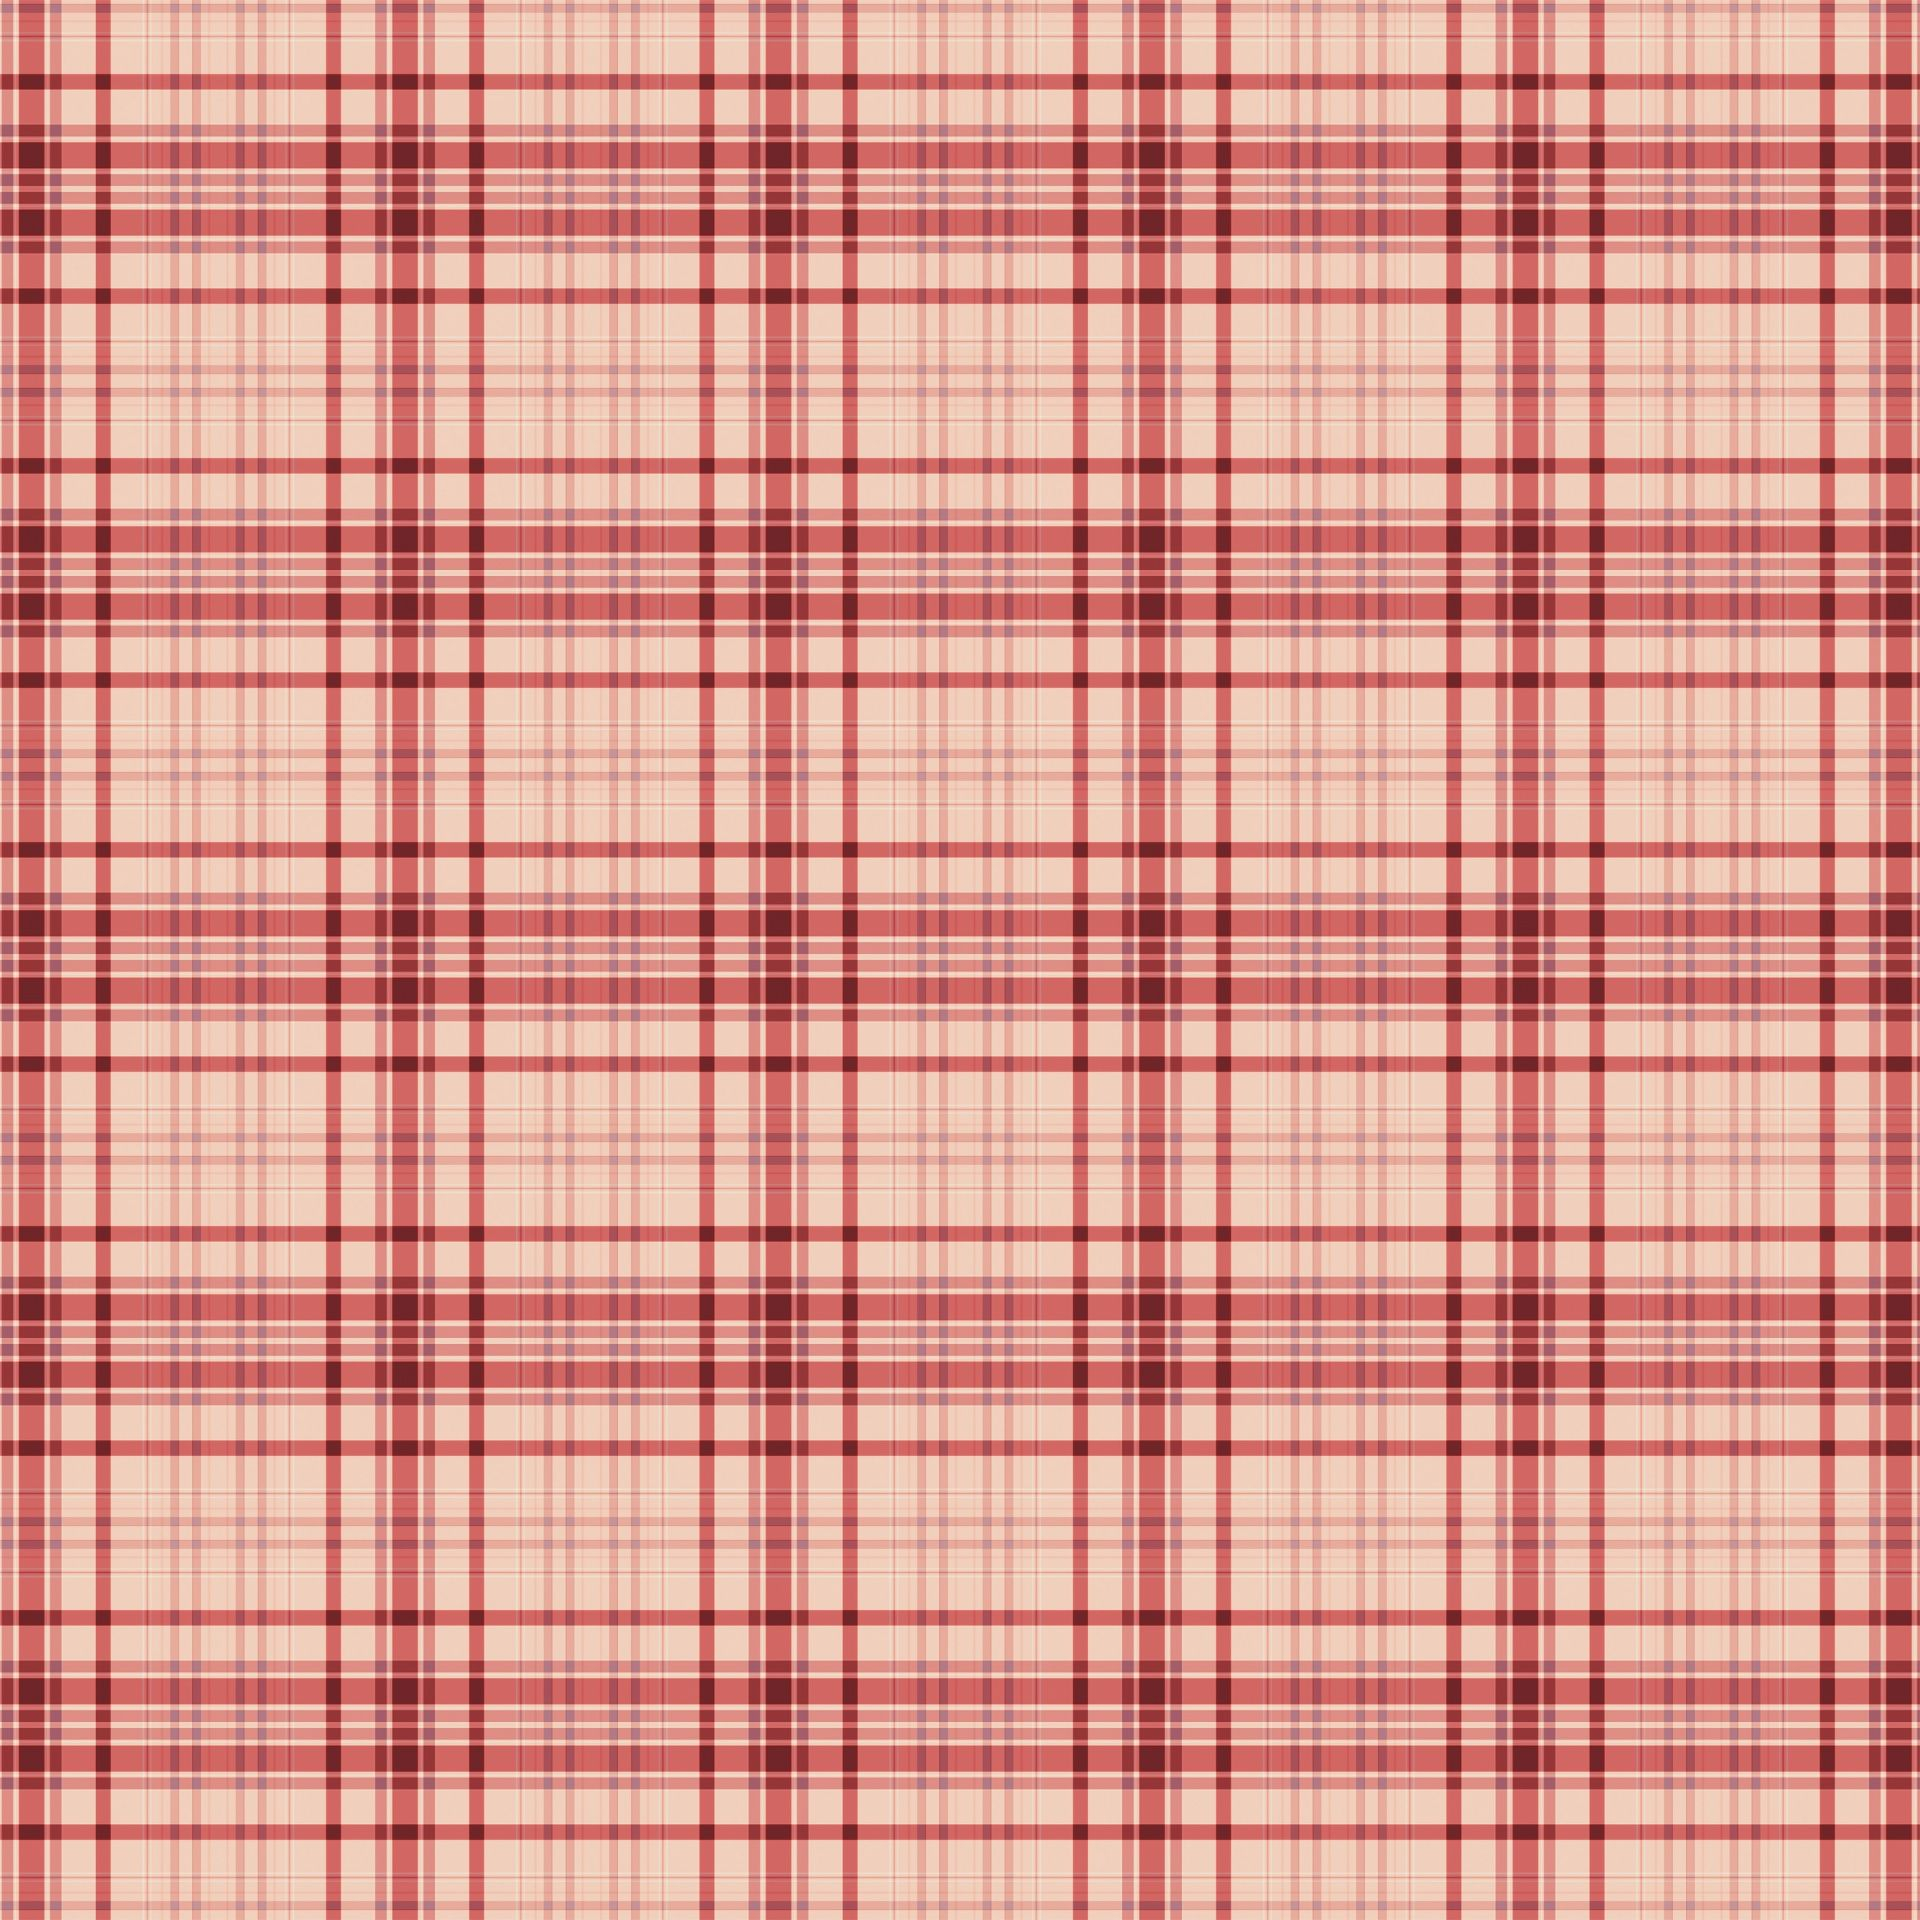 1920x1920 Check Background Red Plaid Free Stock Photo Public Domain Pictures | Custom fabric, Free stock photos, Prints